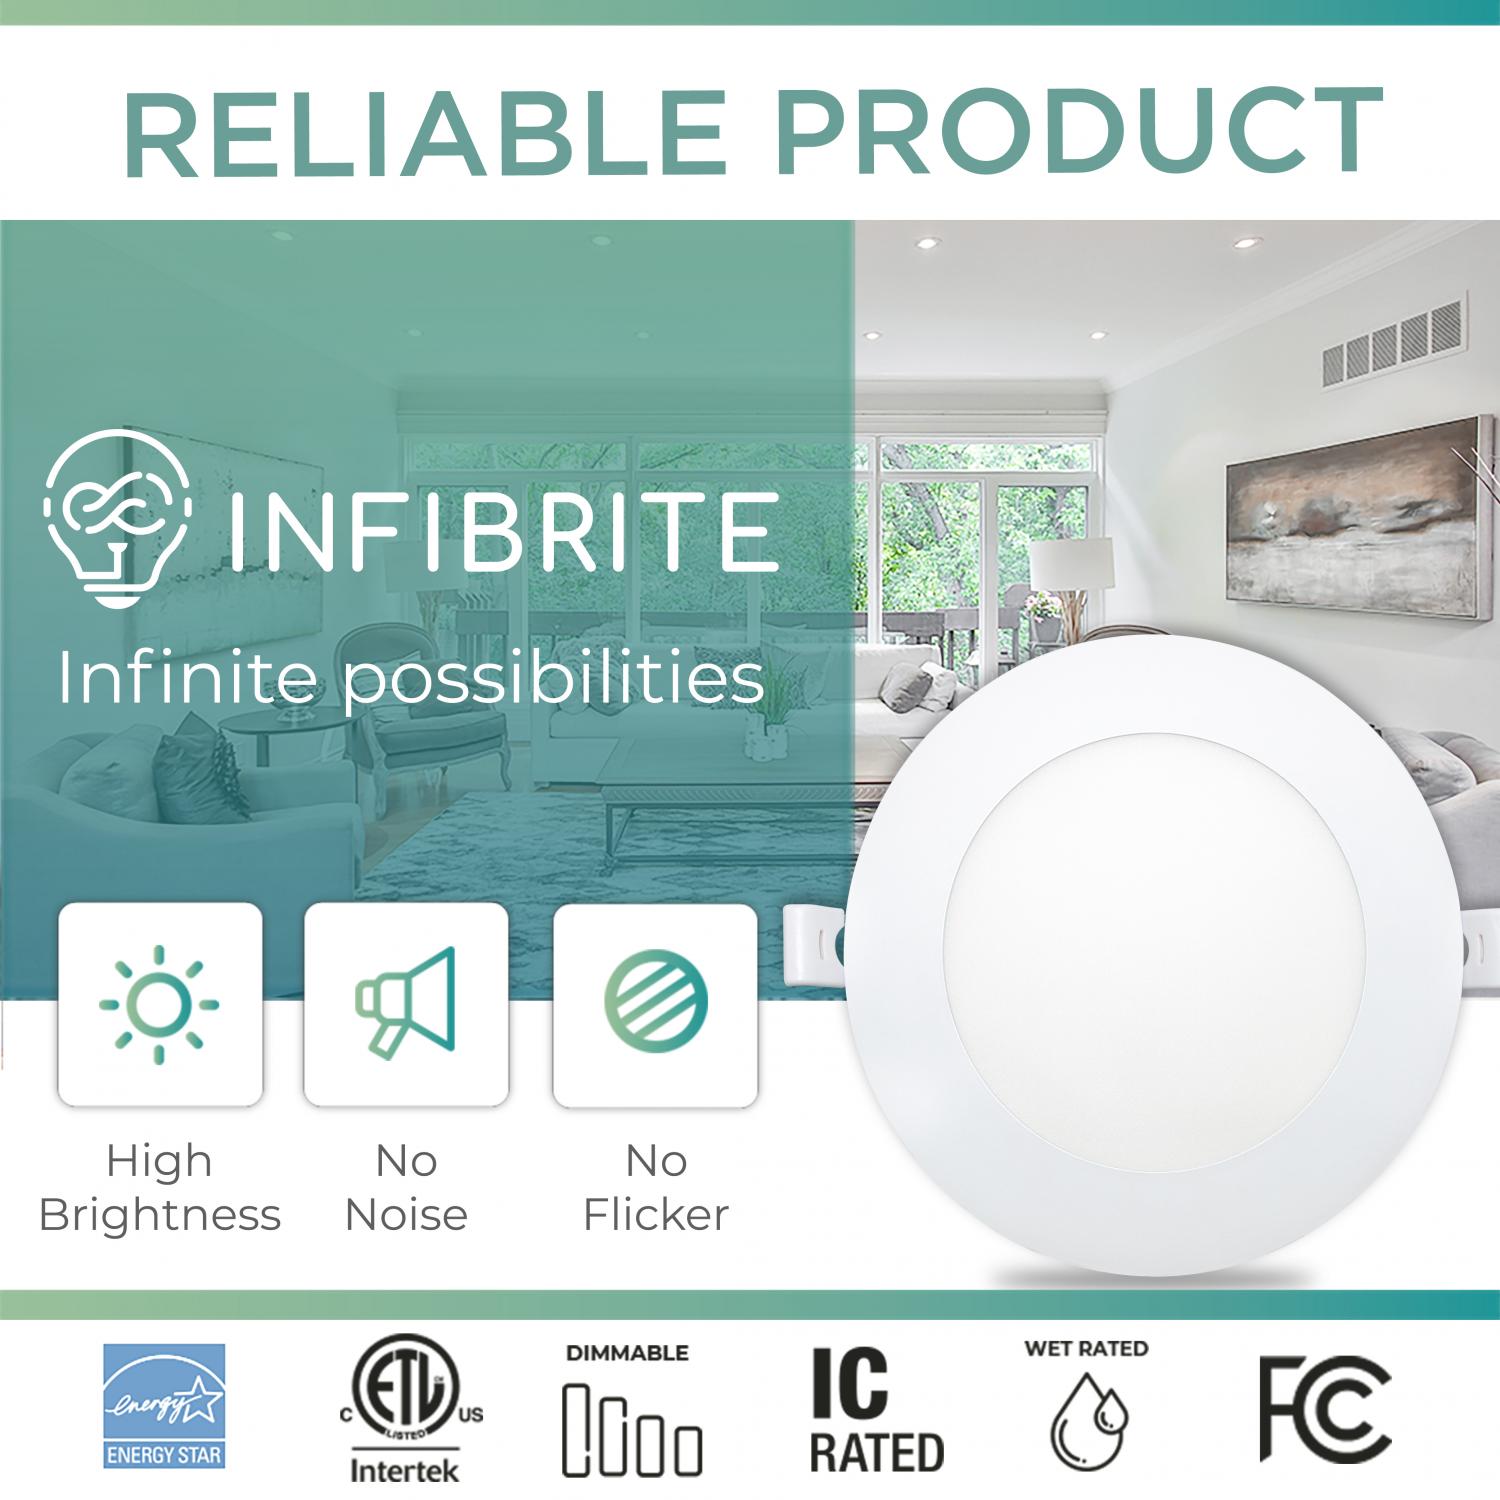 Infibrite 4 Inch 3000K Warm White  9W 750 LM Ultra-Slim LED Ceiling Light with Junction Box, Flush Mount, Dimmable, Fixture for Bedroom, Wet Rated for Bathroom, Easy Install, 75W Eqv, ETL & Energy Star, US Company (6 Pack)